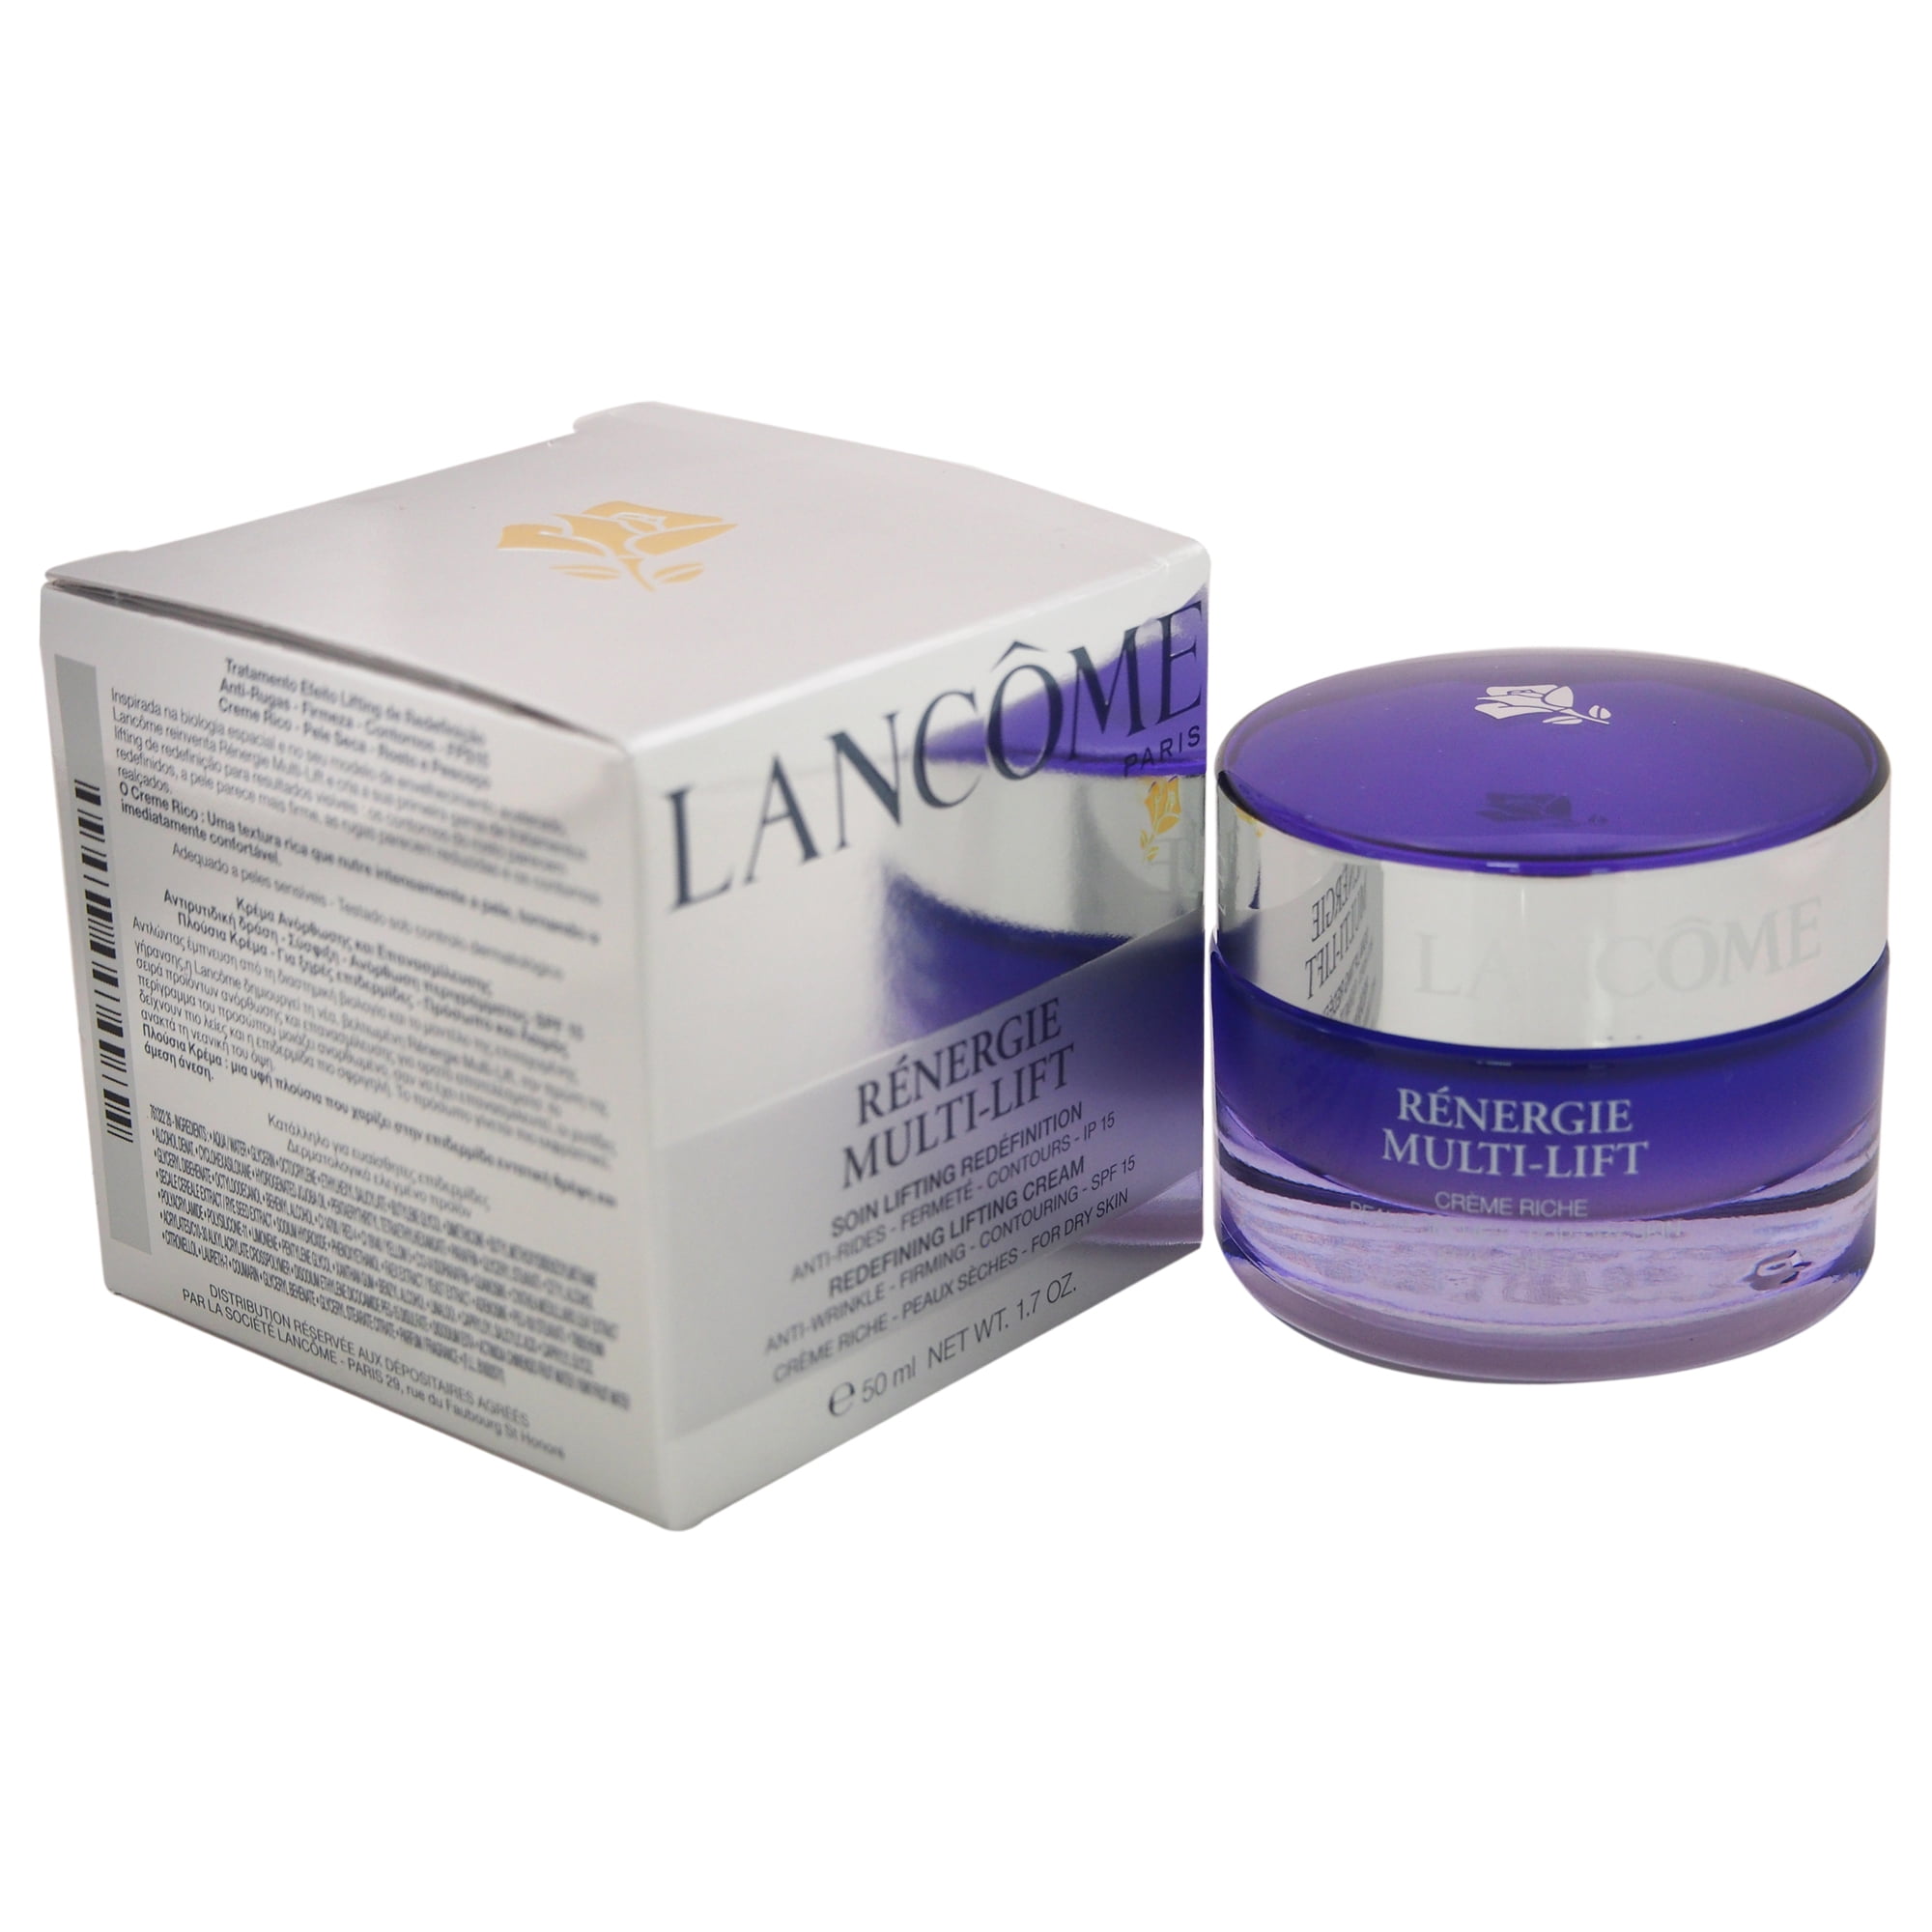 oz - 15 Dry Cream Unisex Types Lifting Cream 1.7 Lancome for Skin - SPF Renergie Redefining by Multi-Lift